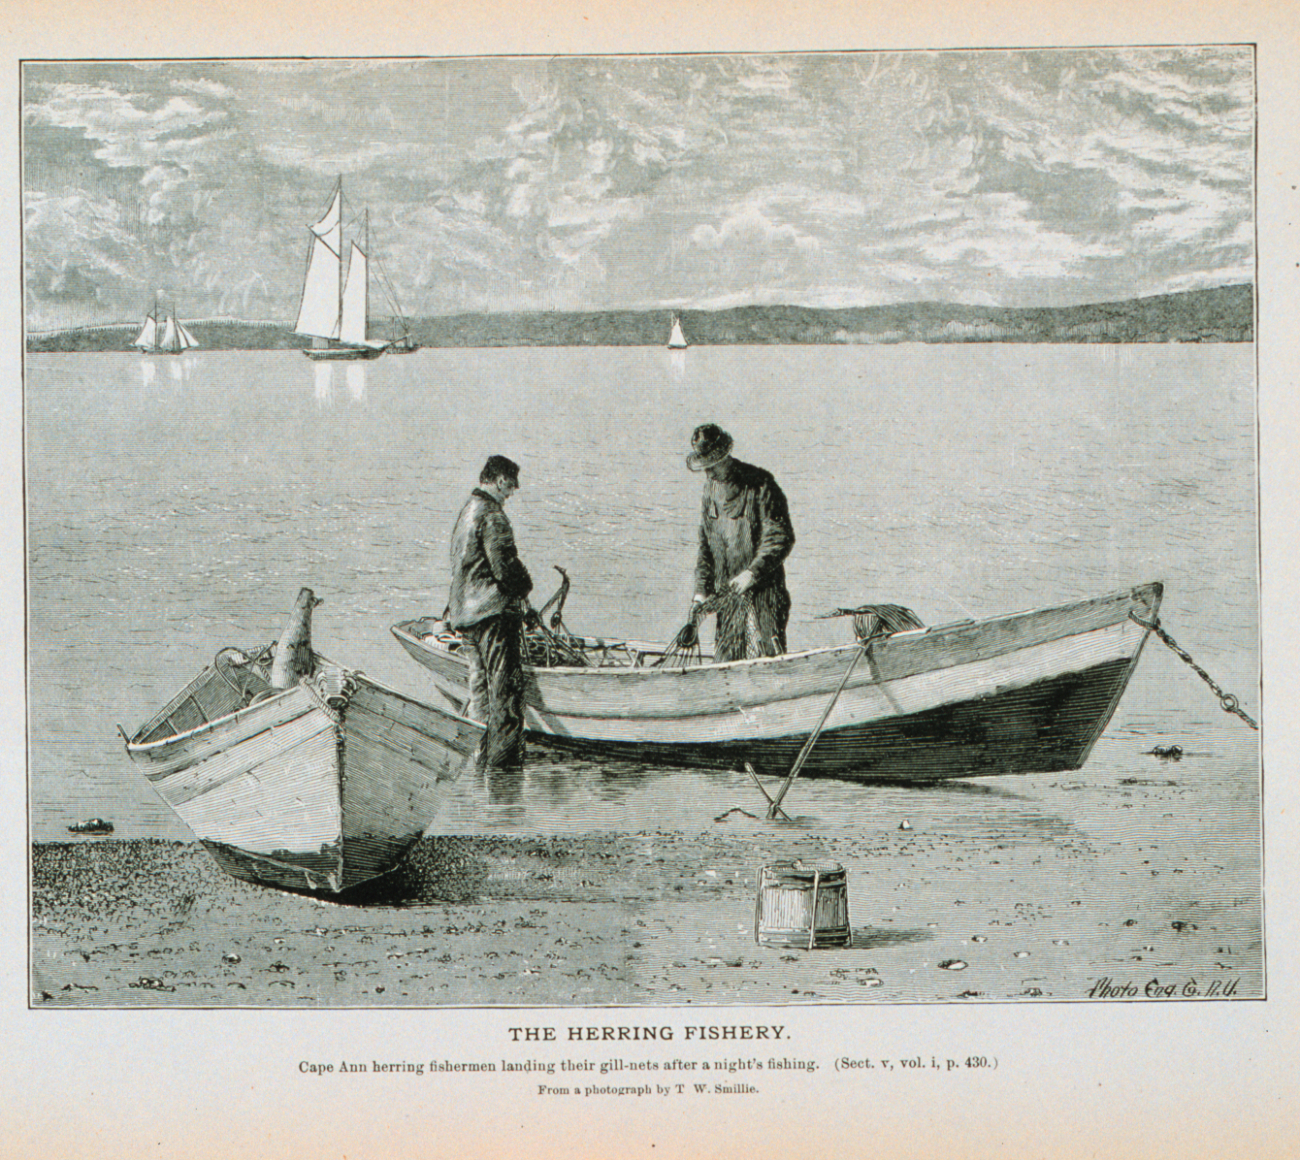 Cape Ann herring fishermen landing their gill-nets after a night's fishingFrom a photograph by T